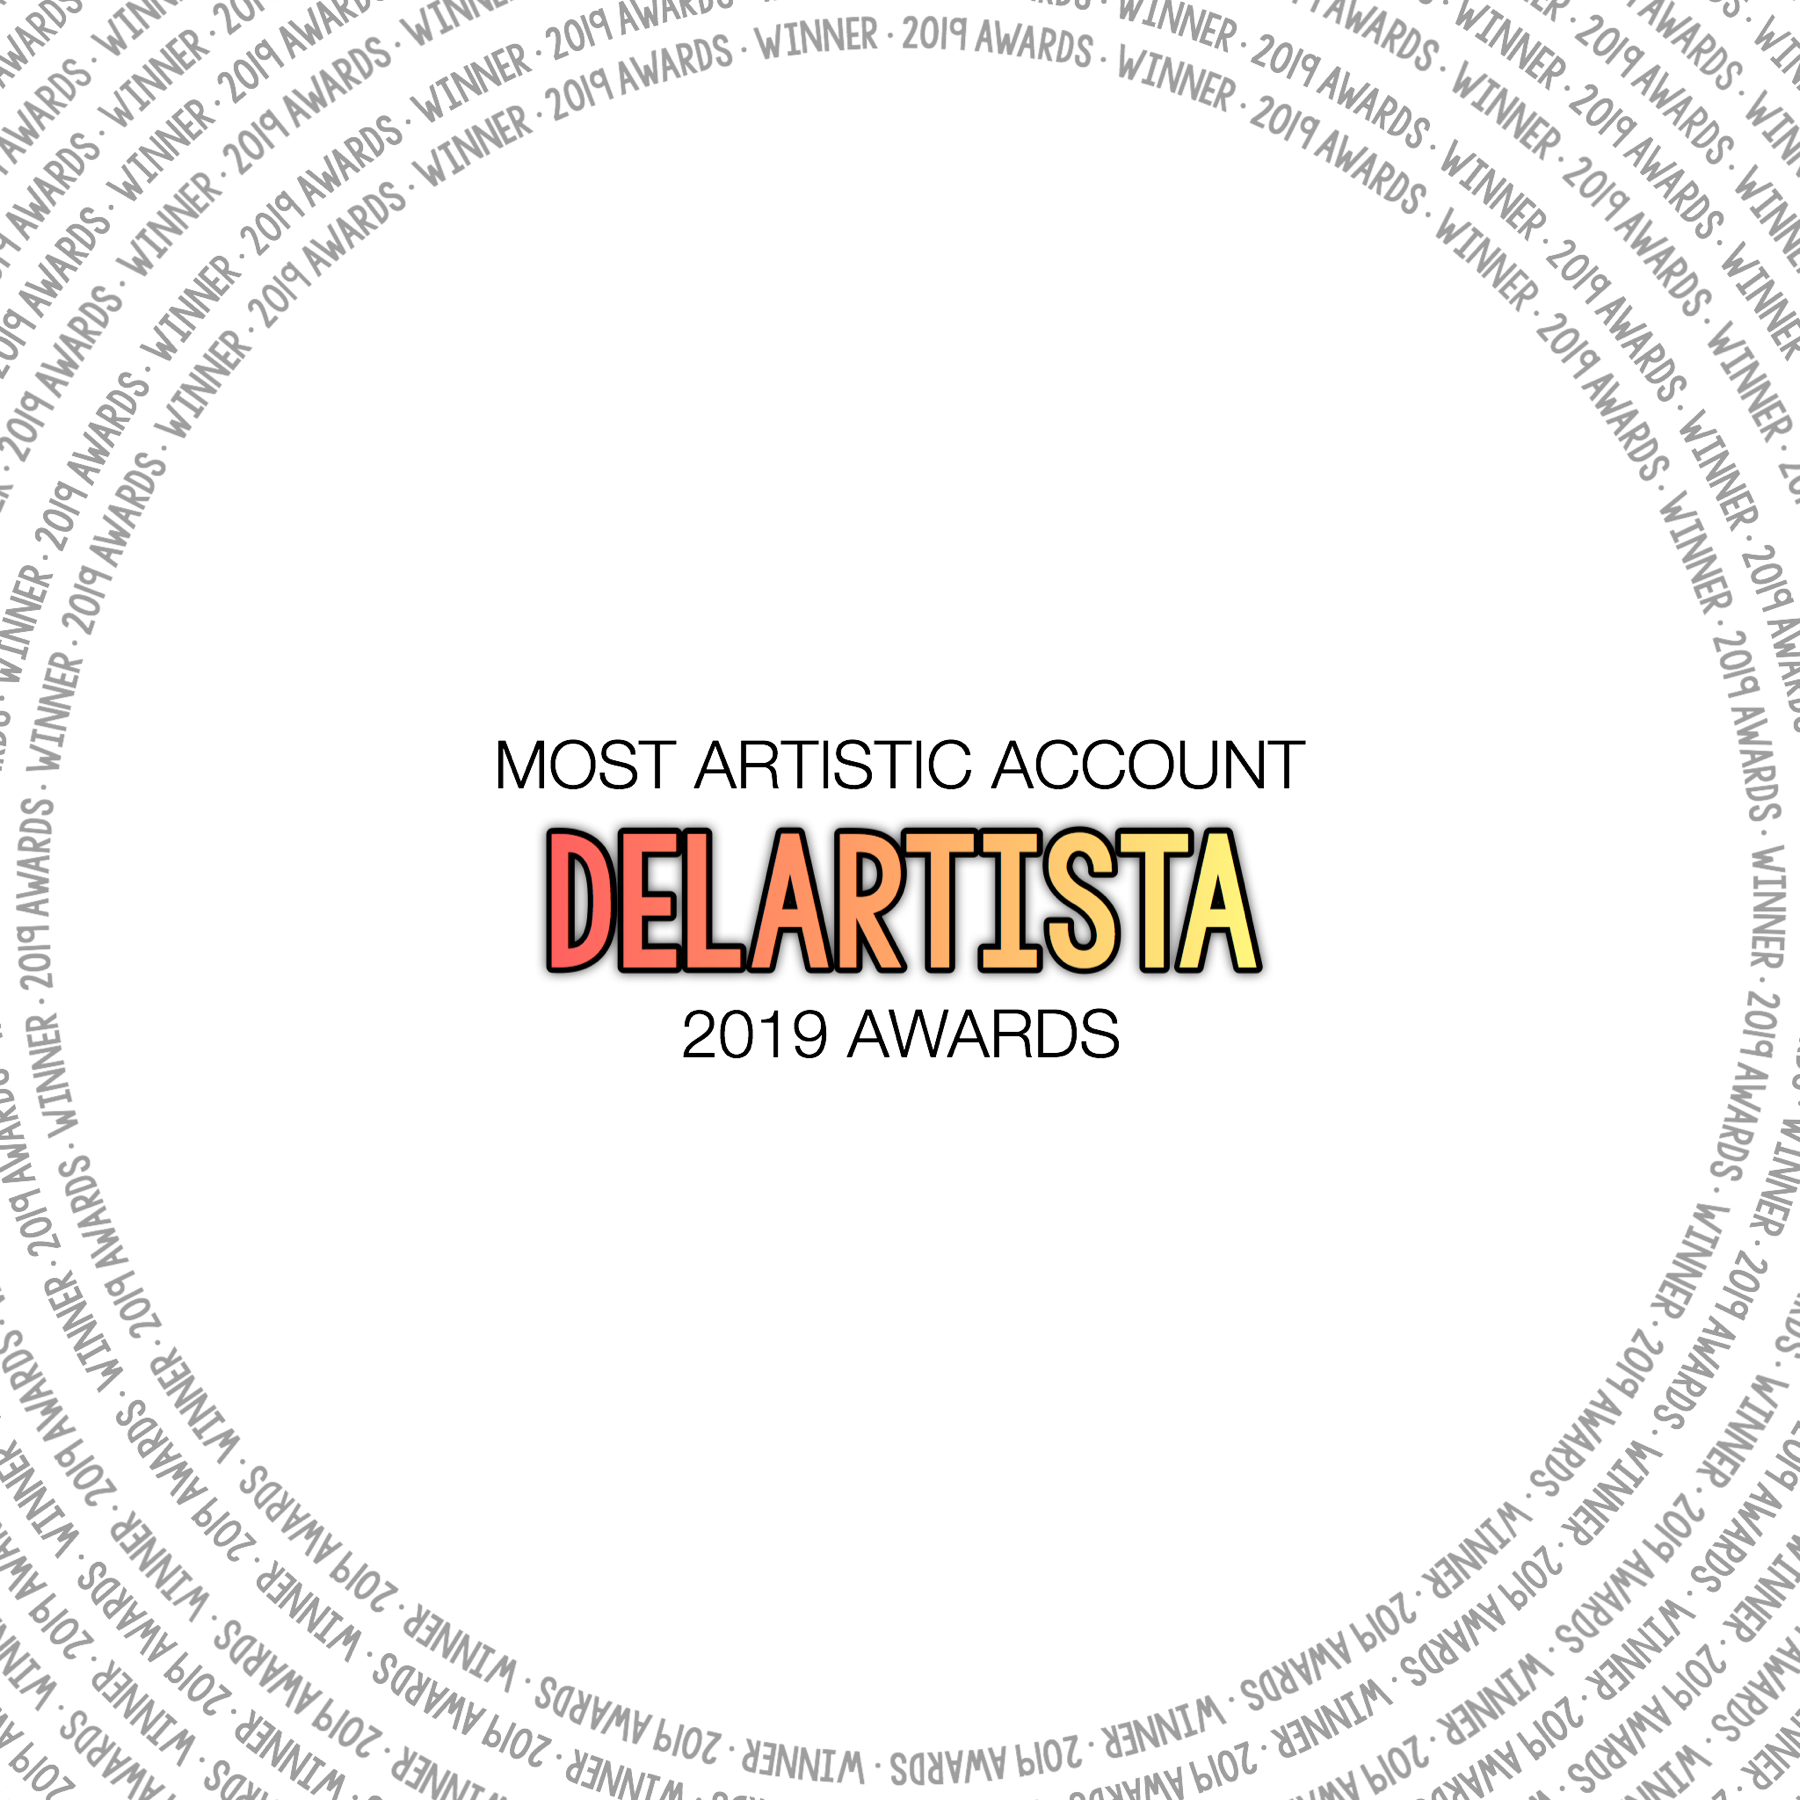 Congratulations @delartista!

The vote count will be in the remixes